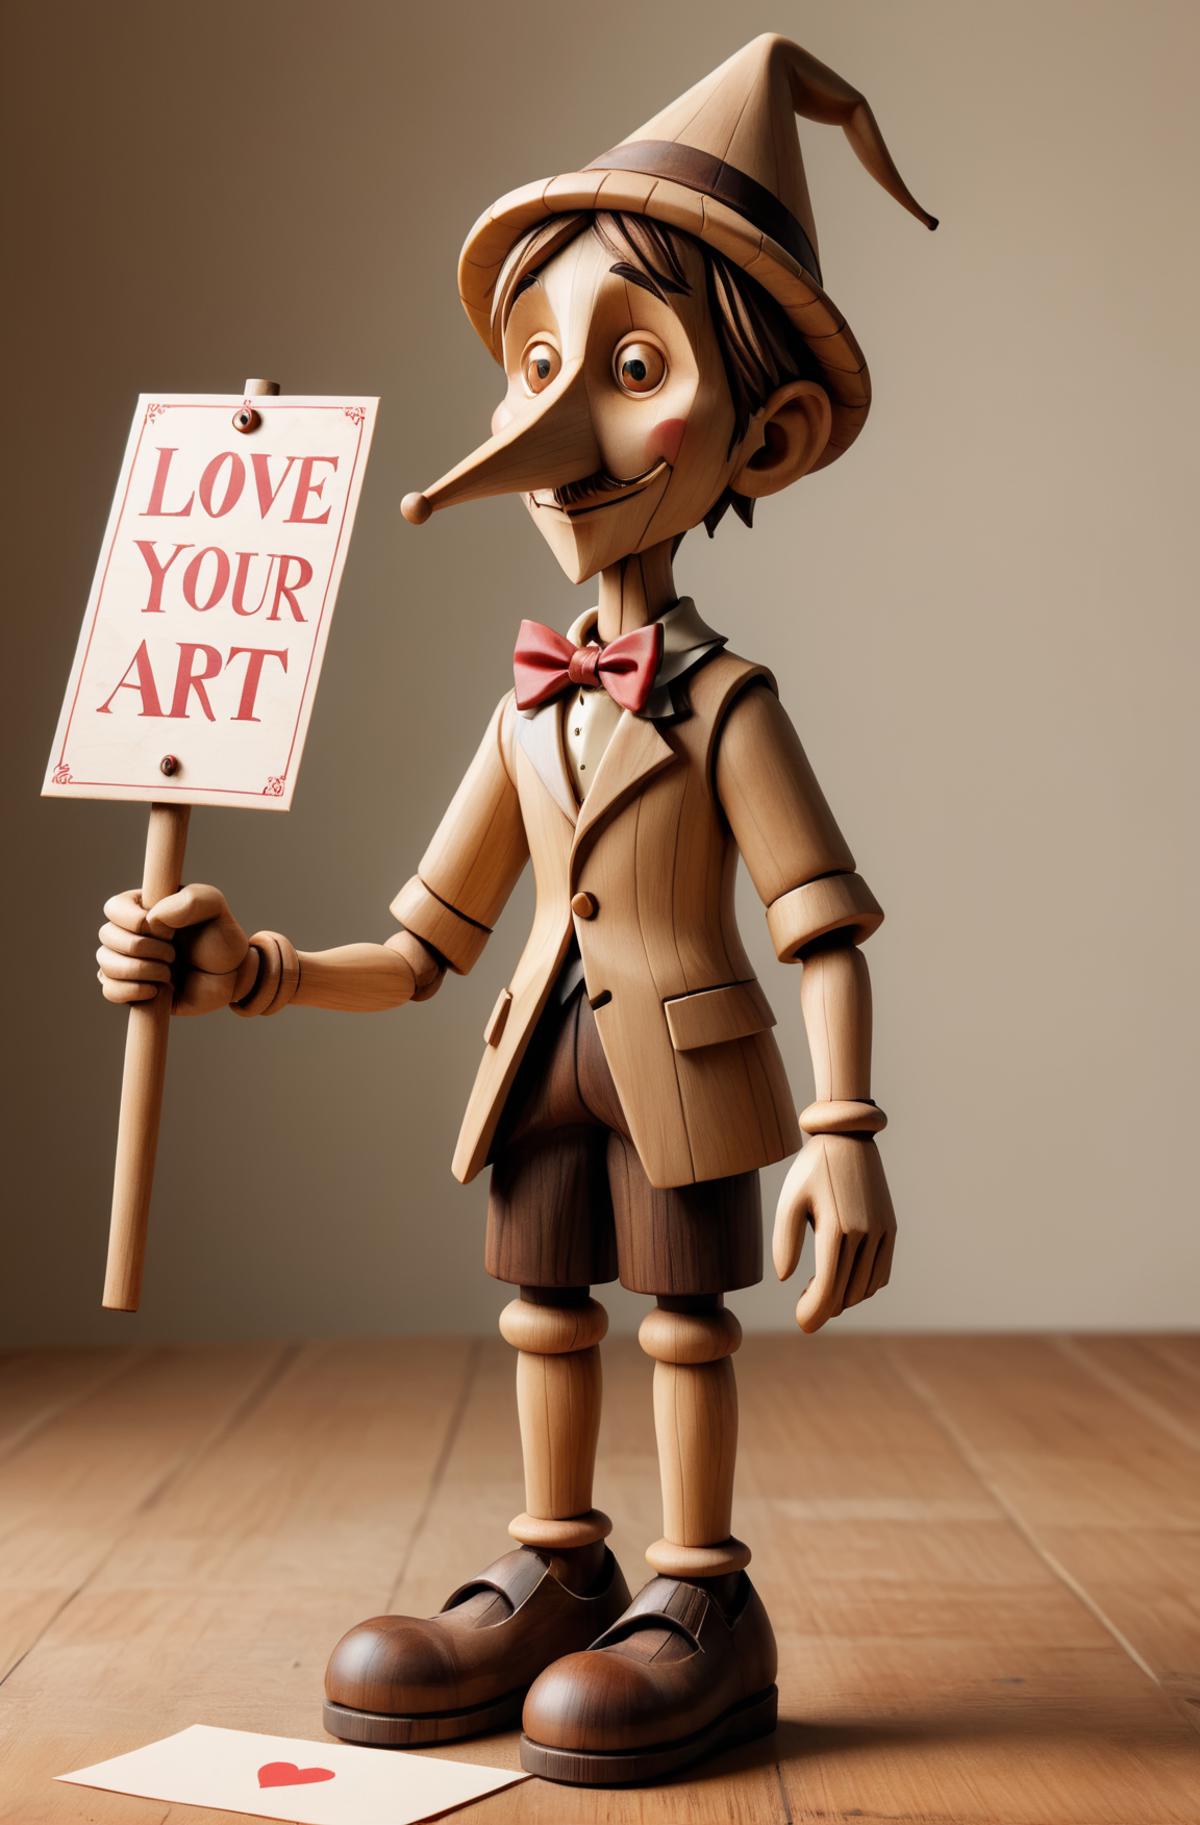 A wooden figure of a man holding a sign that says "Love your Art".